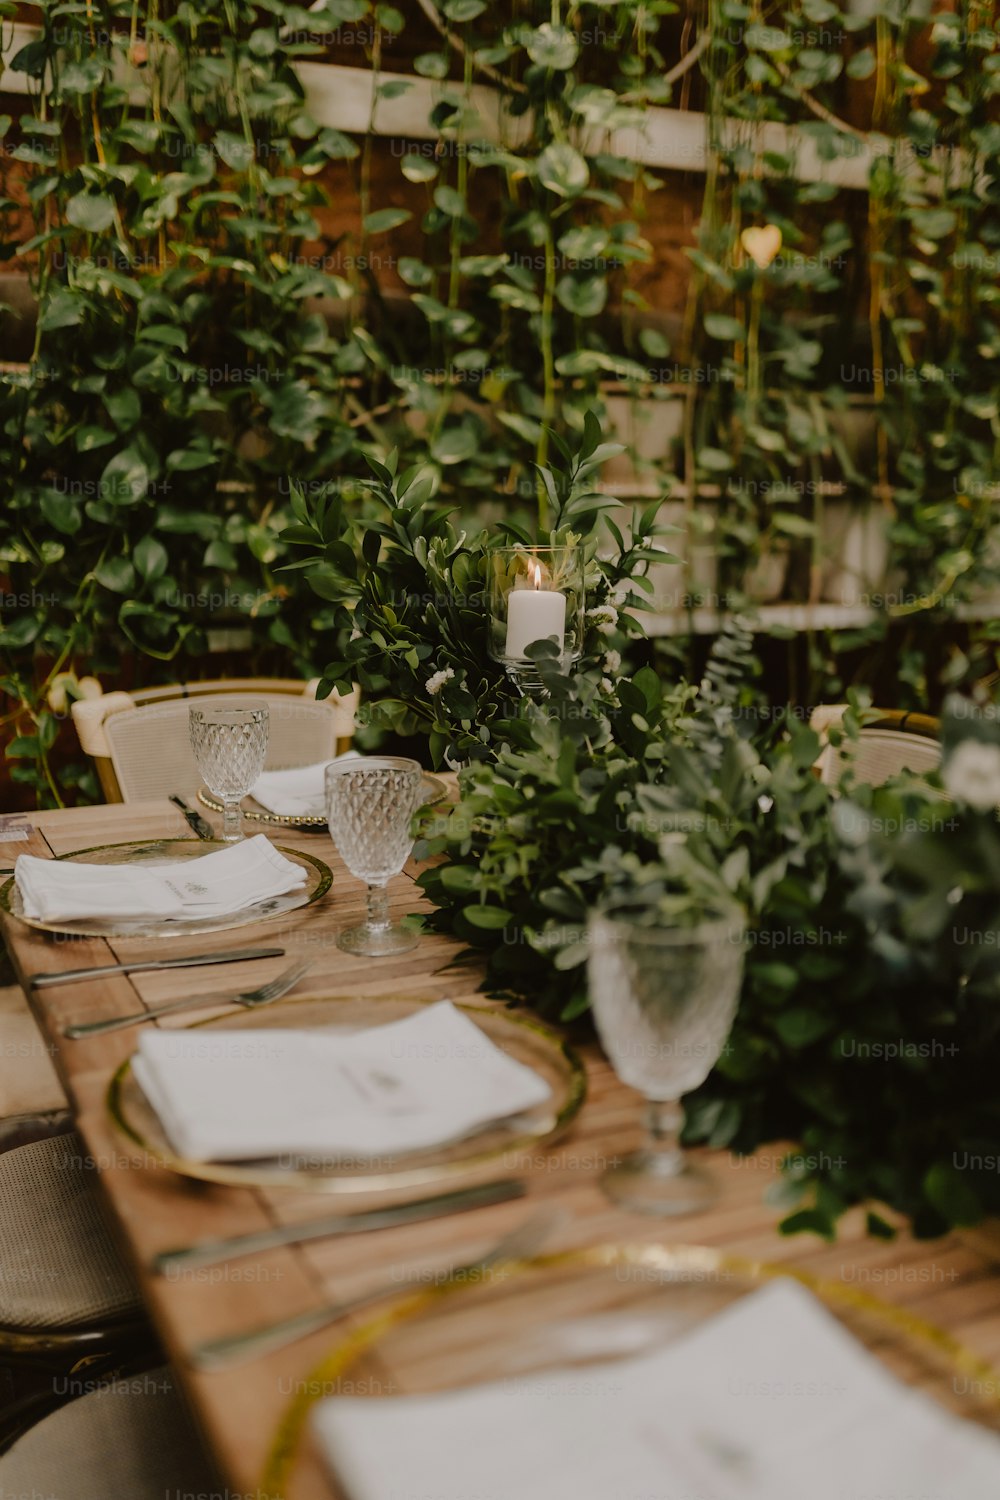 a table set with place settings and greenery